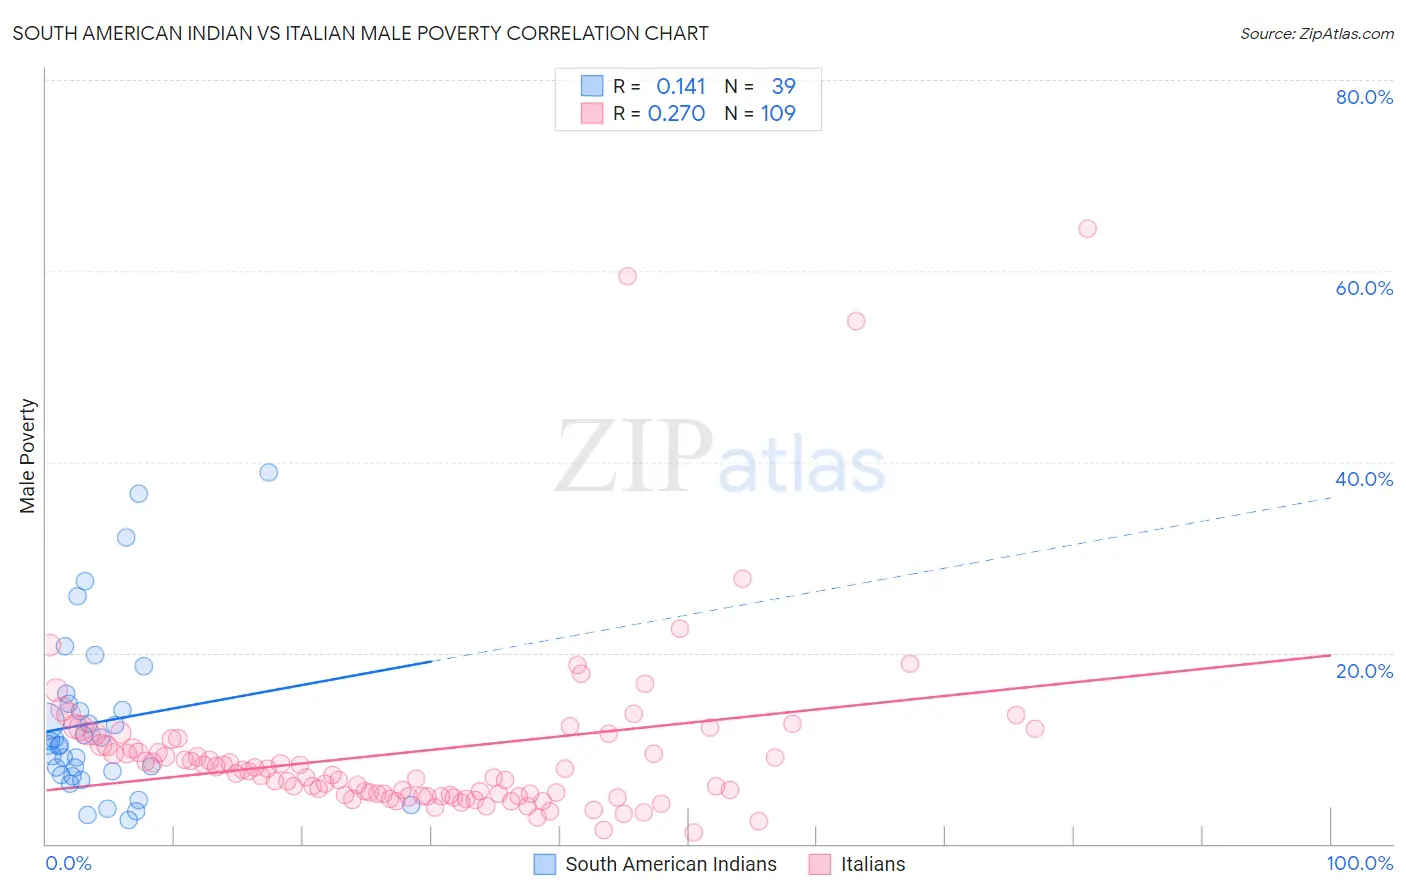 South American Indian vs Italian Male Poverty